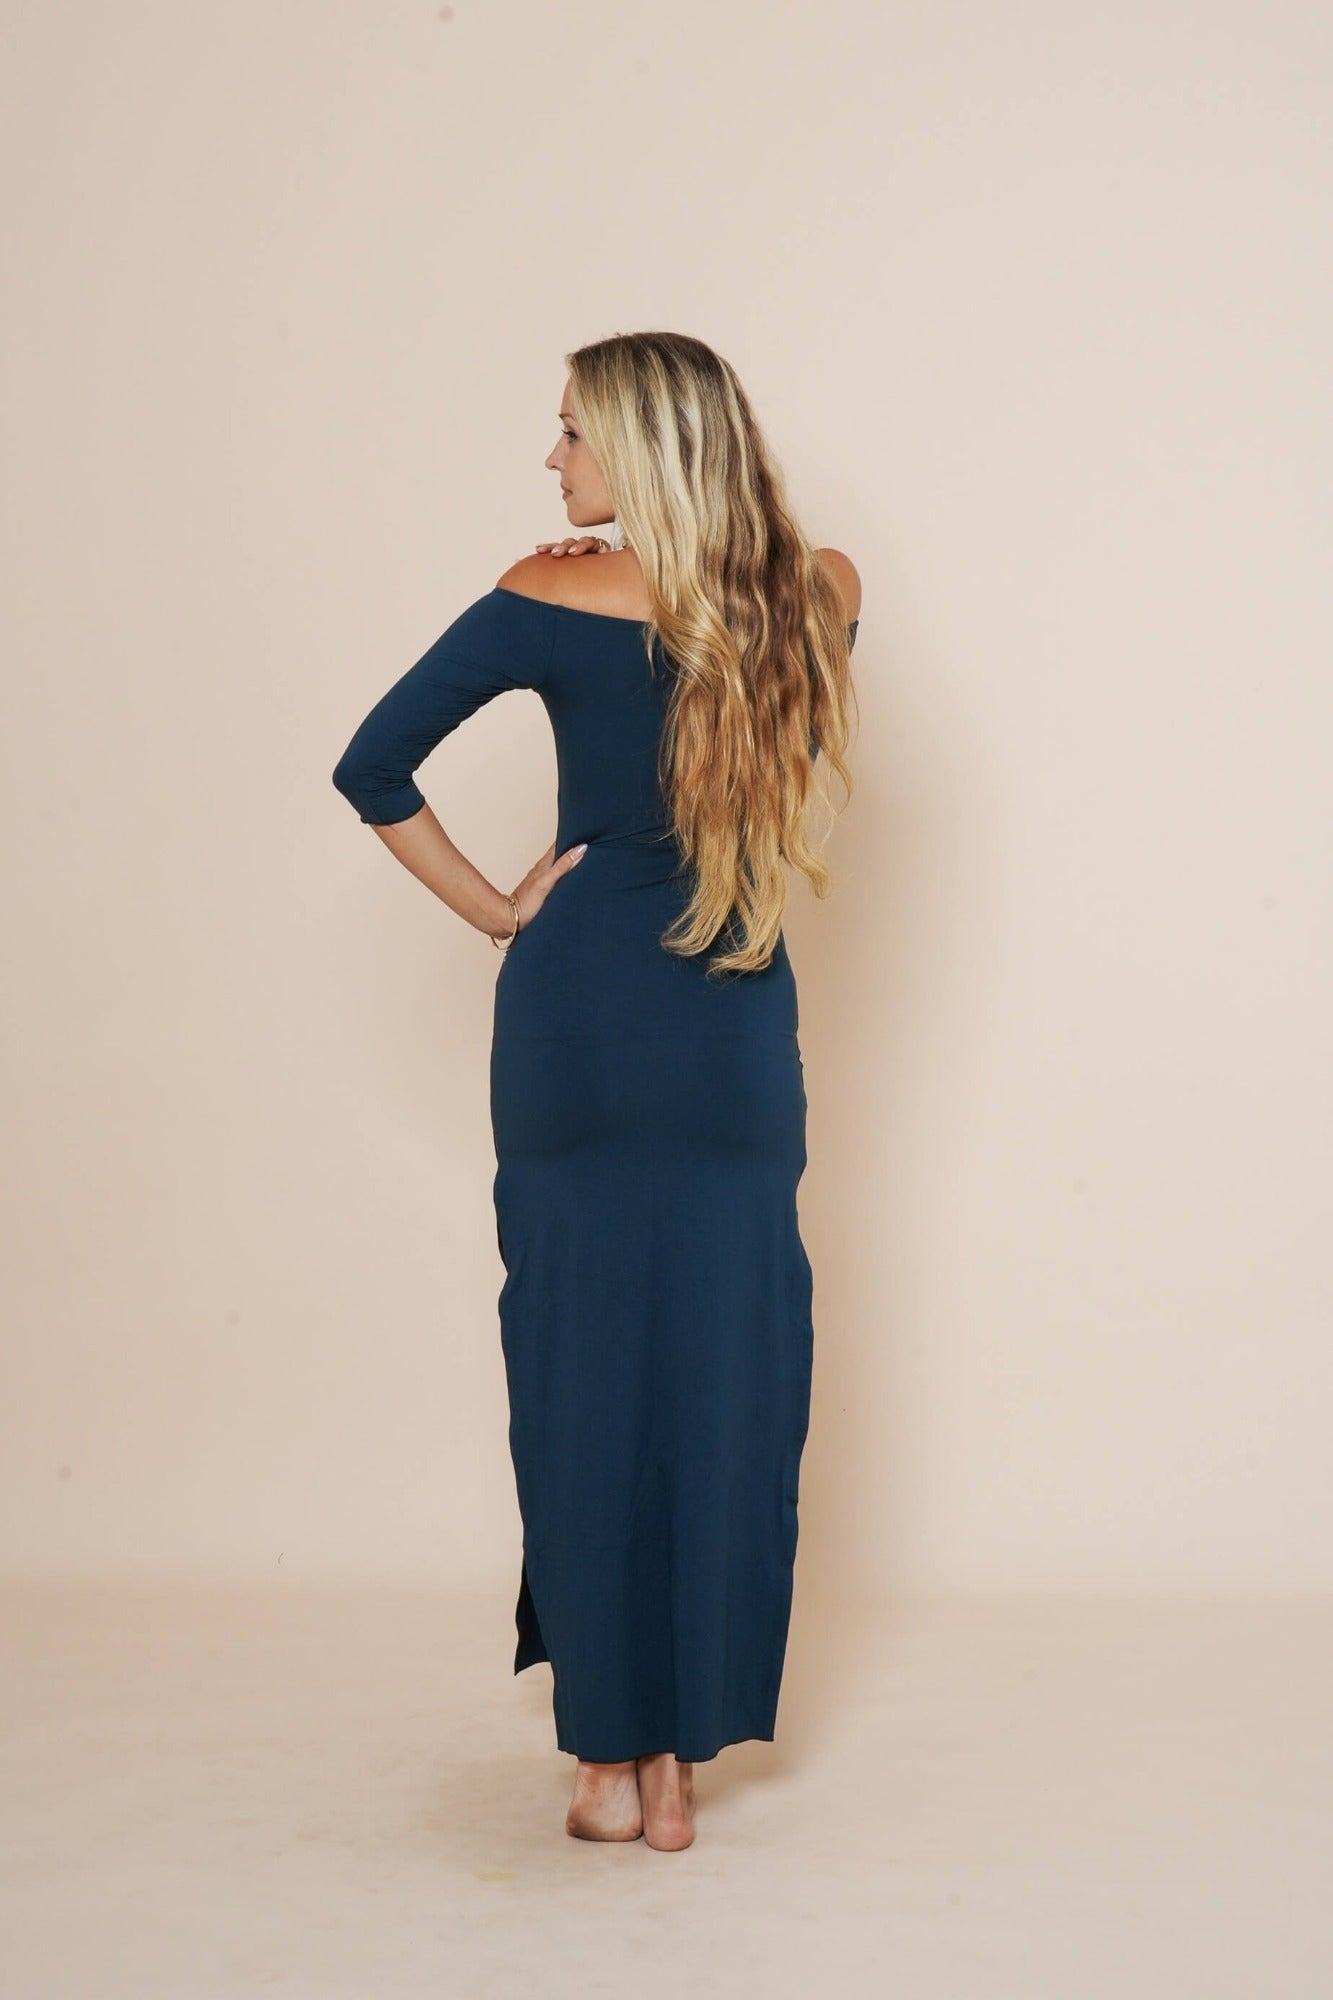 Off shoulder long dress with side cuts and 3/4 sleeves in color dark teal.